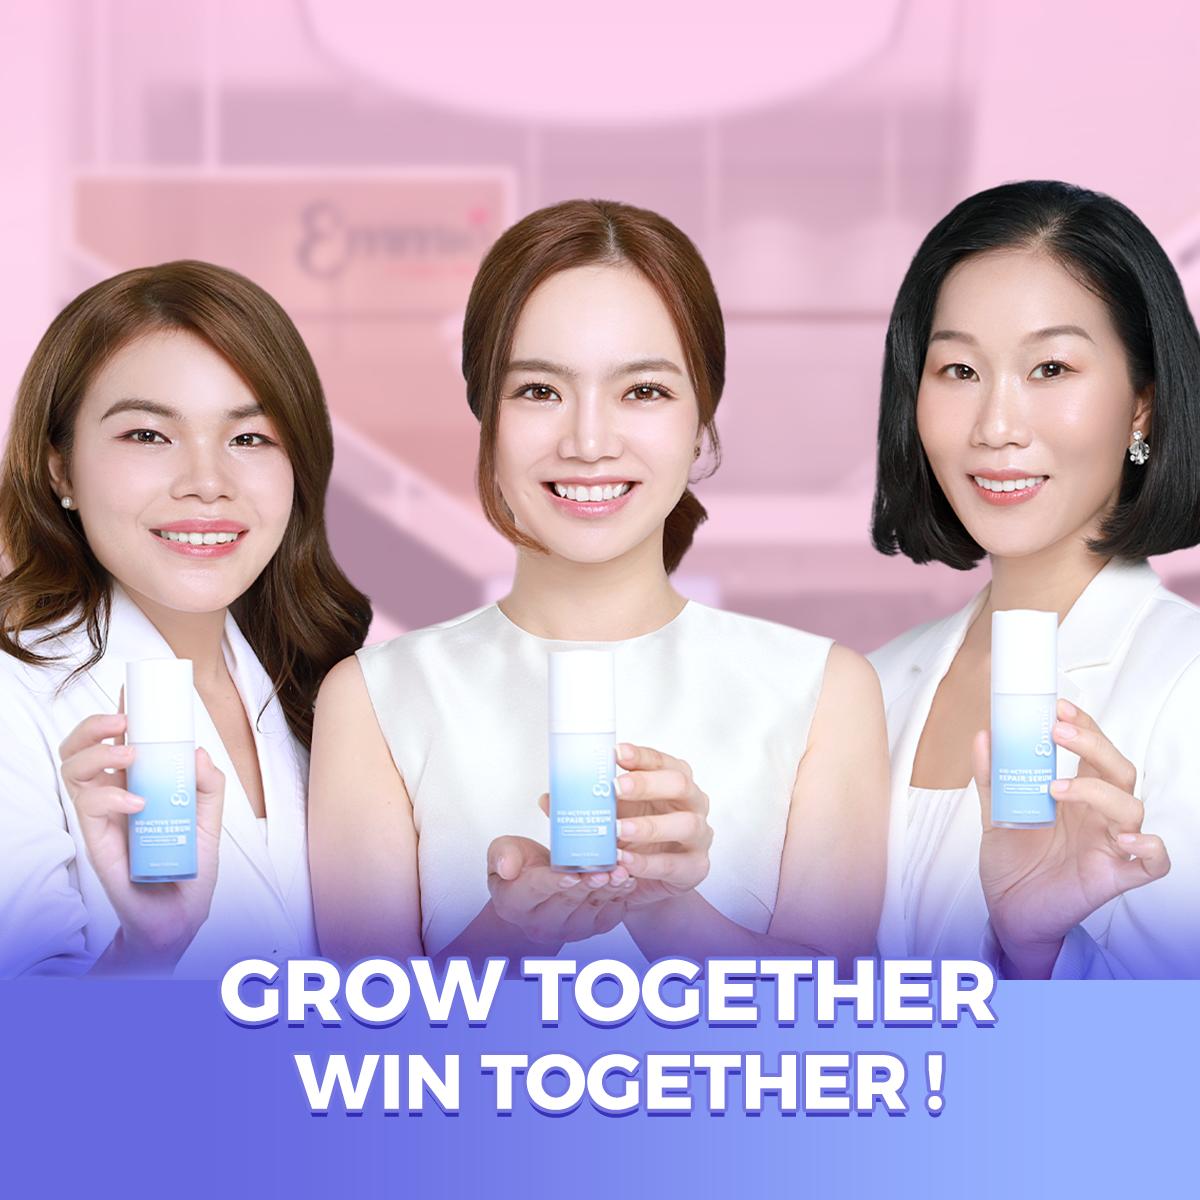 Grow together, win together